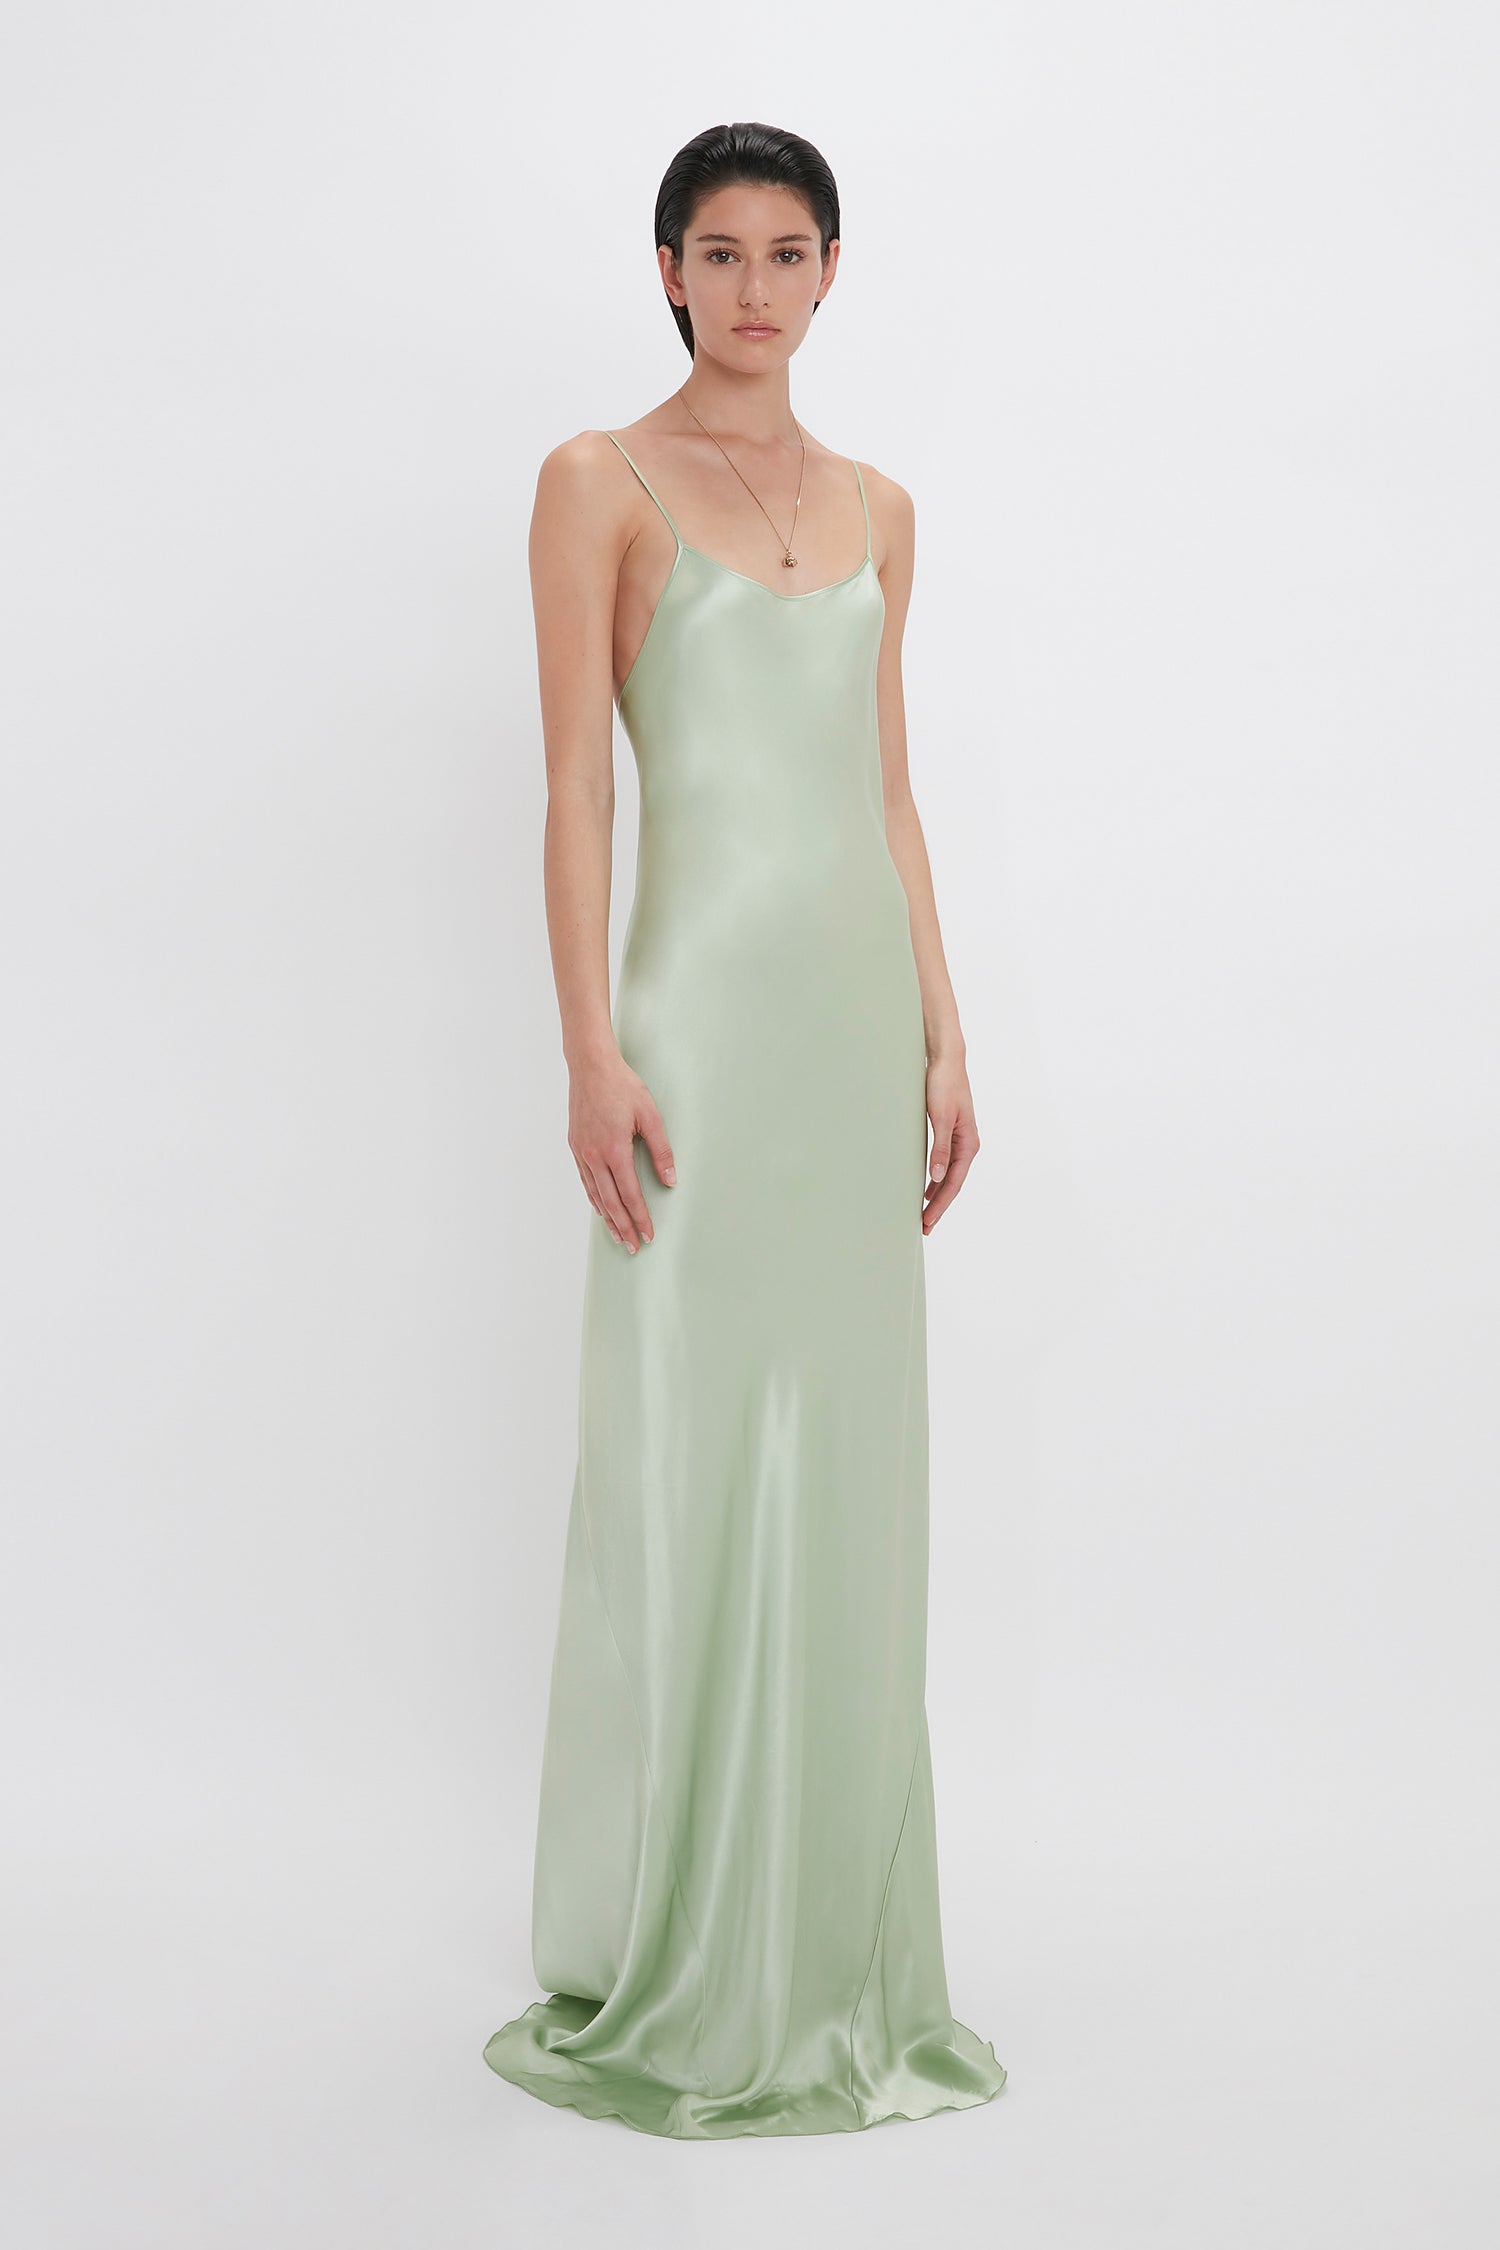 Person standing against a white background wearing a floor-length, satin, light green dress with thin spaghetti straps and a small Exclusive Camellia Flower Necklace In Gold by Victoria Beckham handcrafted in Italy.